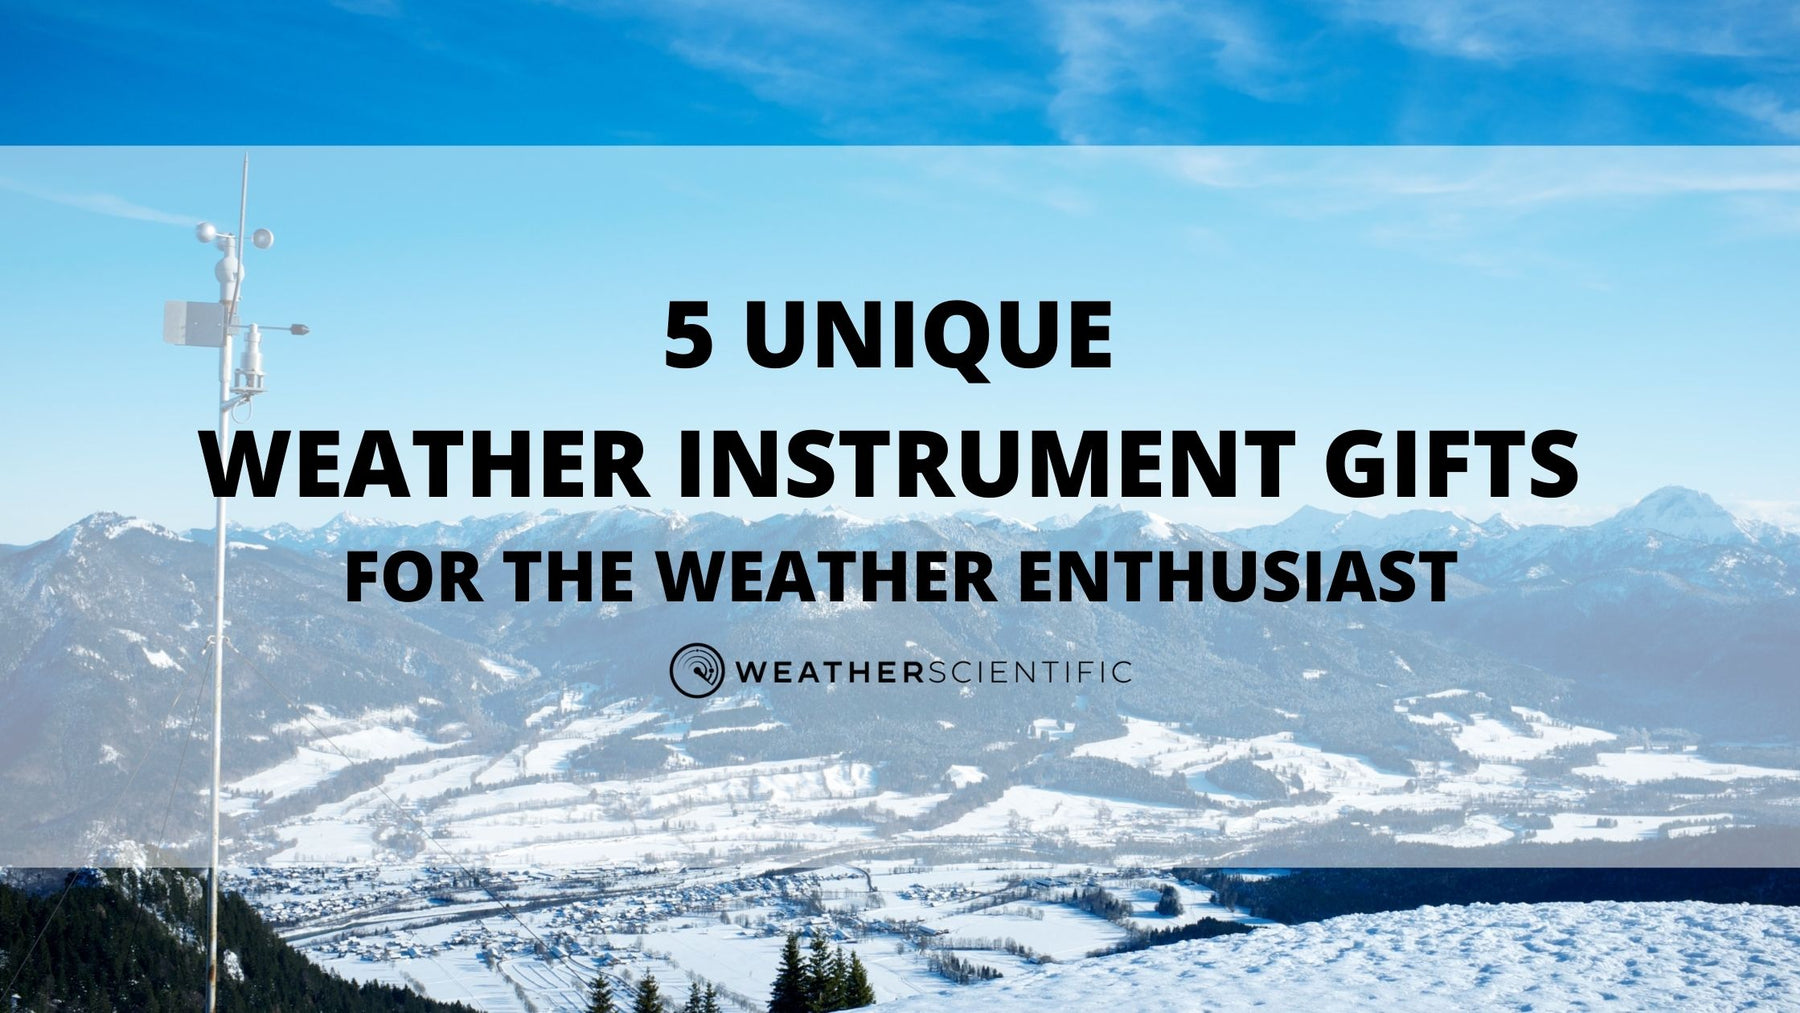 5 Unique Weather Instrument Gifts for the Weather Enthusiast